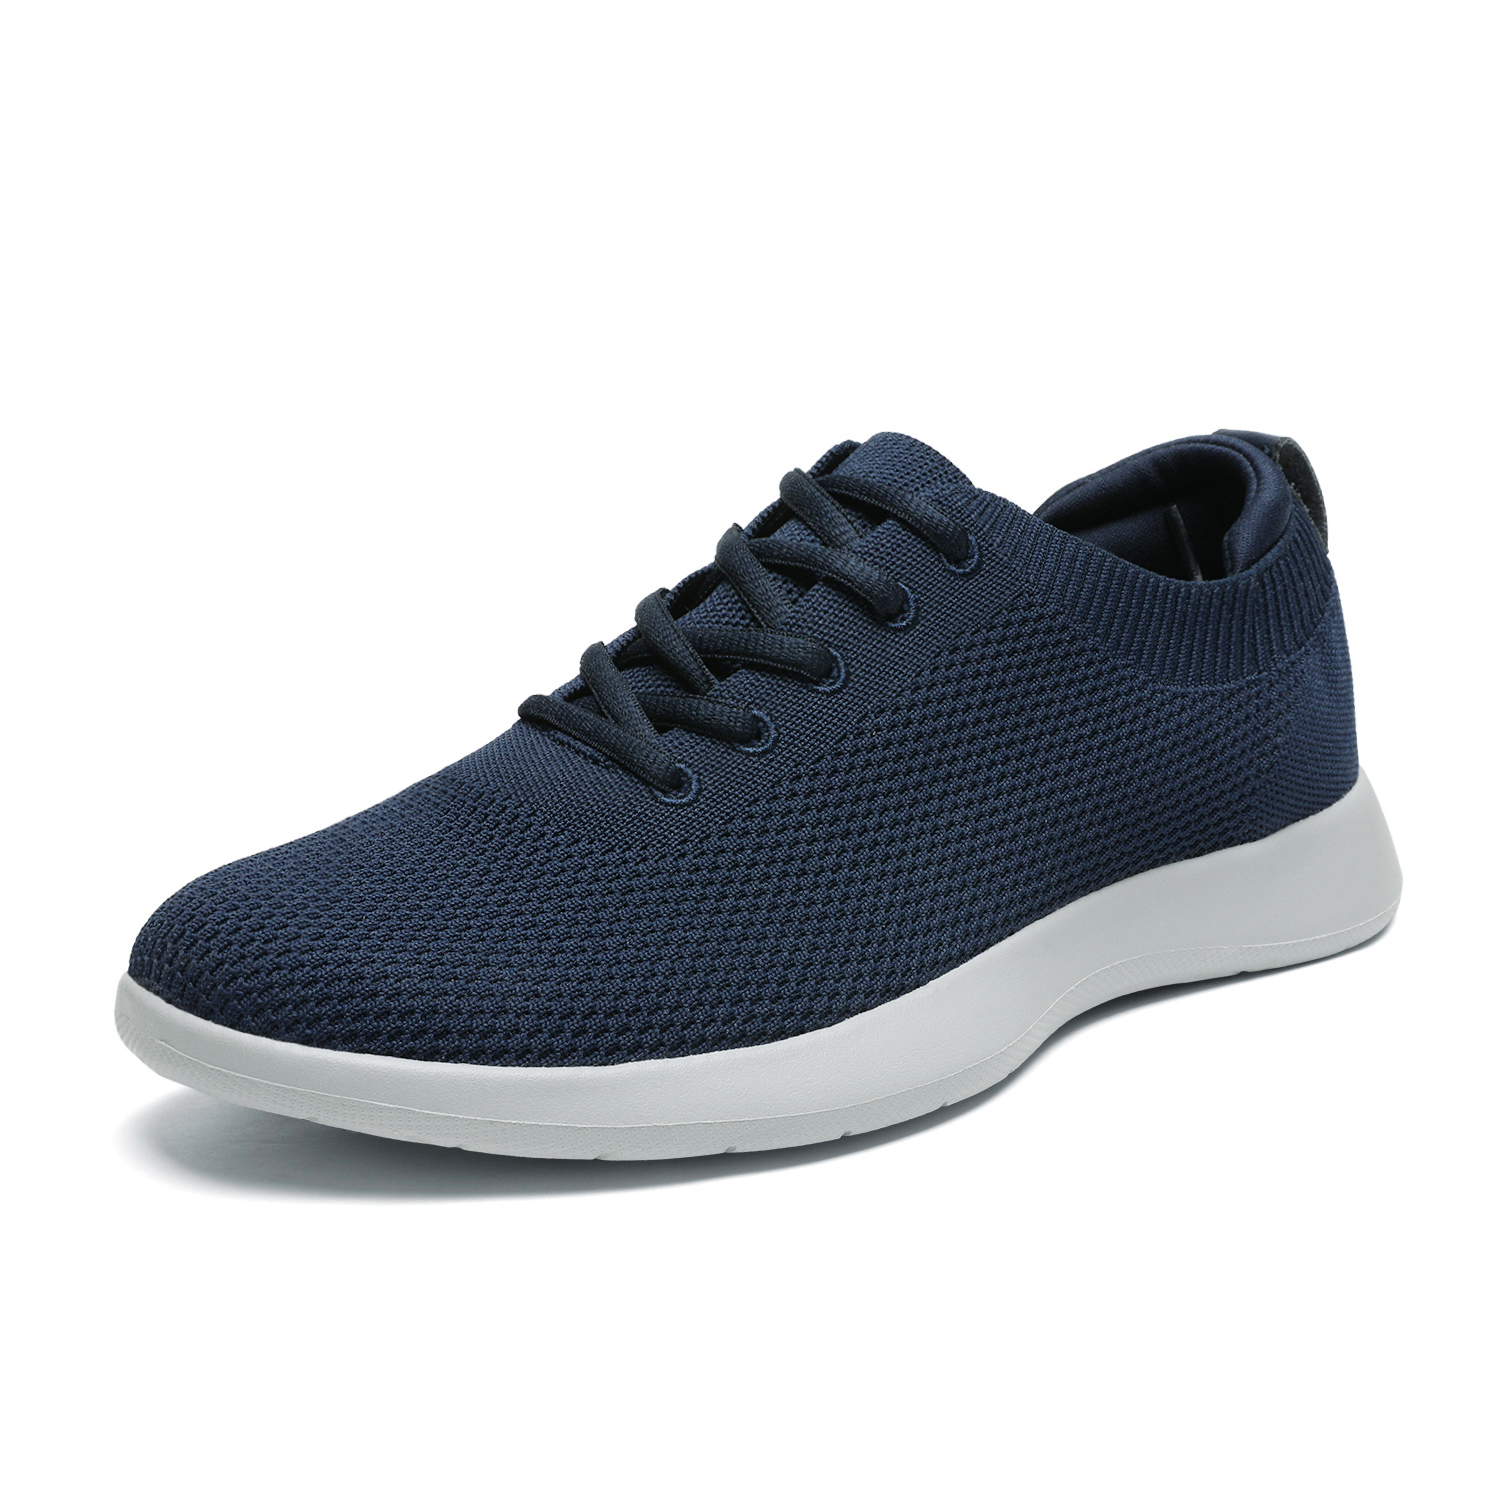 Bruno Marc Mens Fashion Comfort Walking Shoes Breathable Fashion Sneaker Casual Shoe Size 6.5-13 LEGEND-2 NAVY Size 7 - image 1 of 5